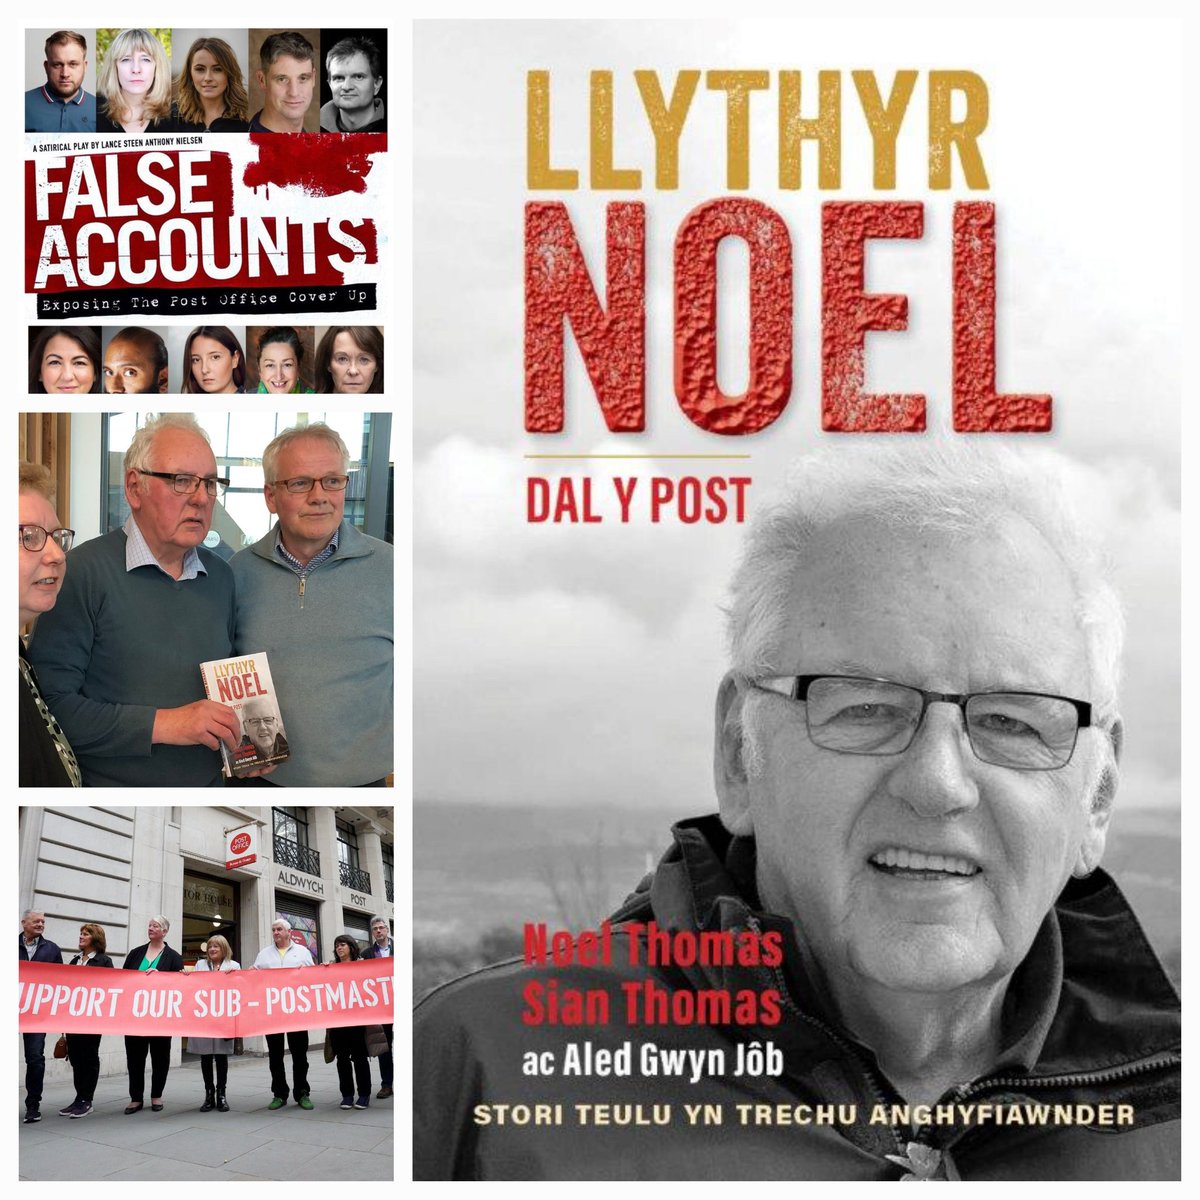 Dal Y Post Noel Hope the sales go well Many non Welsh speakers waiting 4 the English version ... Not long 2 wait @Siani1971 @NoelHughie